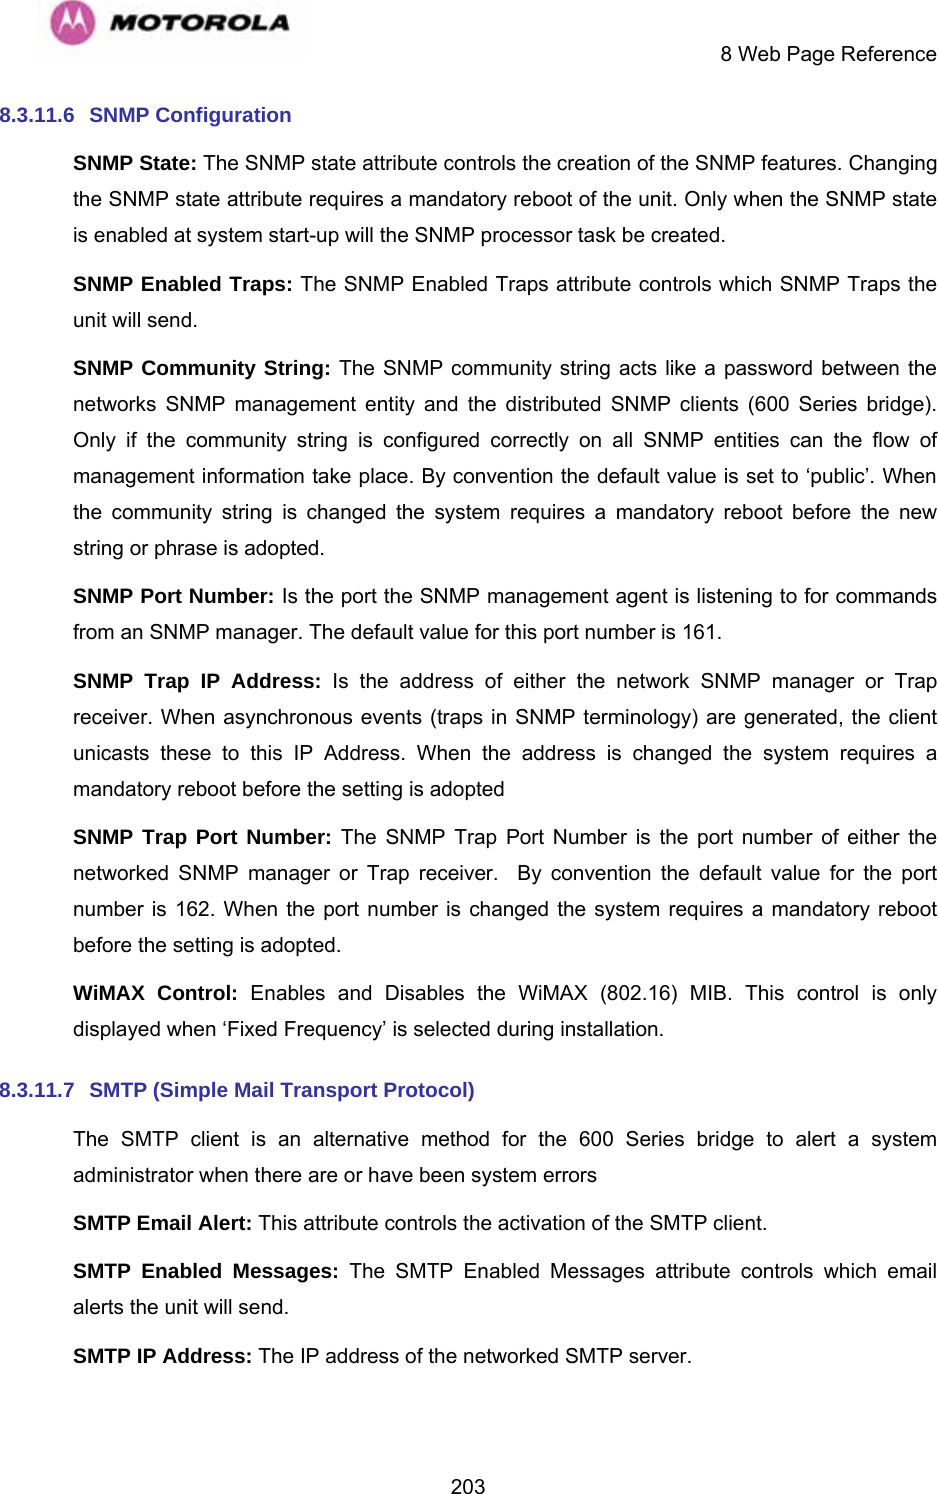     8 Web Page Reference  2038.3.11.6 SNMP Configuration SNMP State: The SNMP state attribute controls the creation of the SNMP features. Changing the SNMP state attribute requires a mandatory reboot of the unit. Only when the SNMP state is enabled at system start-up will the SNMP processor task be created. SNMP Enabled Traps: The SNMP Enabled Traps attribute controls which SNMP Traps the unit will send. SNMP Community String: The SNMP community string acts like a password between the networks SNMP management entity and the distributed SNMP clients (600 Series bridge). Only if the community string is configured correctly on all SNMP entities can the flow of management information take place. By convention the default value is set to ‘public’. When the community string is changed the system requires a mandatory reboot before the new string or phrase is adopted. SNMP Port Number: Is the port the SNMP management agent is listening to for commands from an SNMP manager. The default value for this port number is 161. SNMP Trap IP Address: Is the address of either the network SNMP manager or Trap receiver. When asynchronous events (traps in SNMP terminology) are generated, the client unicasts these to this IP Address. When the address is changed the system requires a mandatory reboot before the setting is adopted SNMP Trap Port Number: The SNMP Trap Port Number is the port number of either the networked SNMP manager or Trap receiver.  By convention the default value for the port number is 162. When the port number is changed the system requires a mandatory reboot before the setting is adopted. WiMAX Control: Enables and Disables the WiMAX (802.16) MIB. This control is only displayed when ‘Fixed Frequency’ is selected during installation. 8.3.11.7  SMTP (Simple Mail Transport Protocol) The SMTP client is an alternative method for the 600 Series bridge to alert a system administrator when there are or have been system errors SMTP Email Alert: This attribute controls the activation of the SMTP client. SMTP Enabled Messages: The SMTP Enabled Messages attribute controls which email alerts the unit will send. SMTP IP Address: The IP address of the networked SMTP server. 